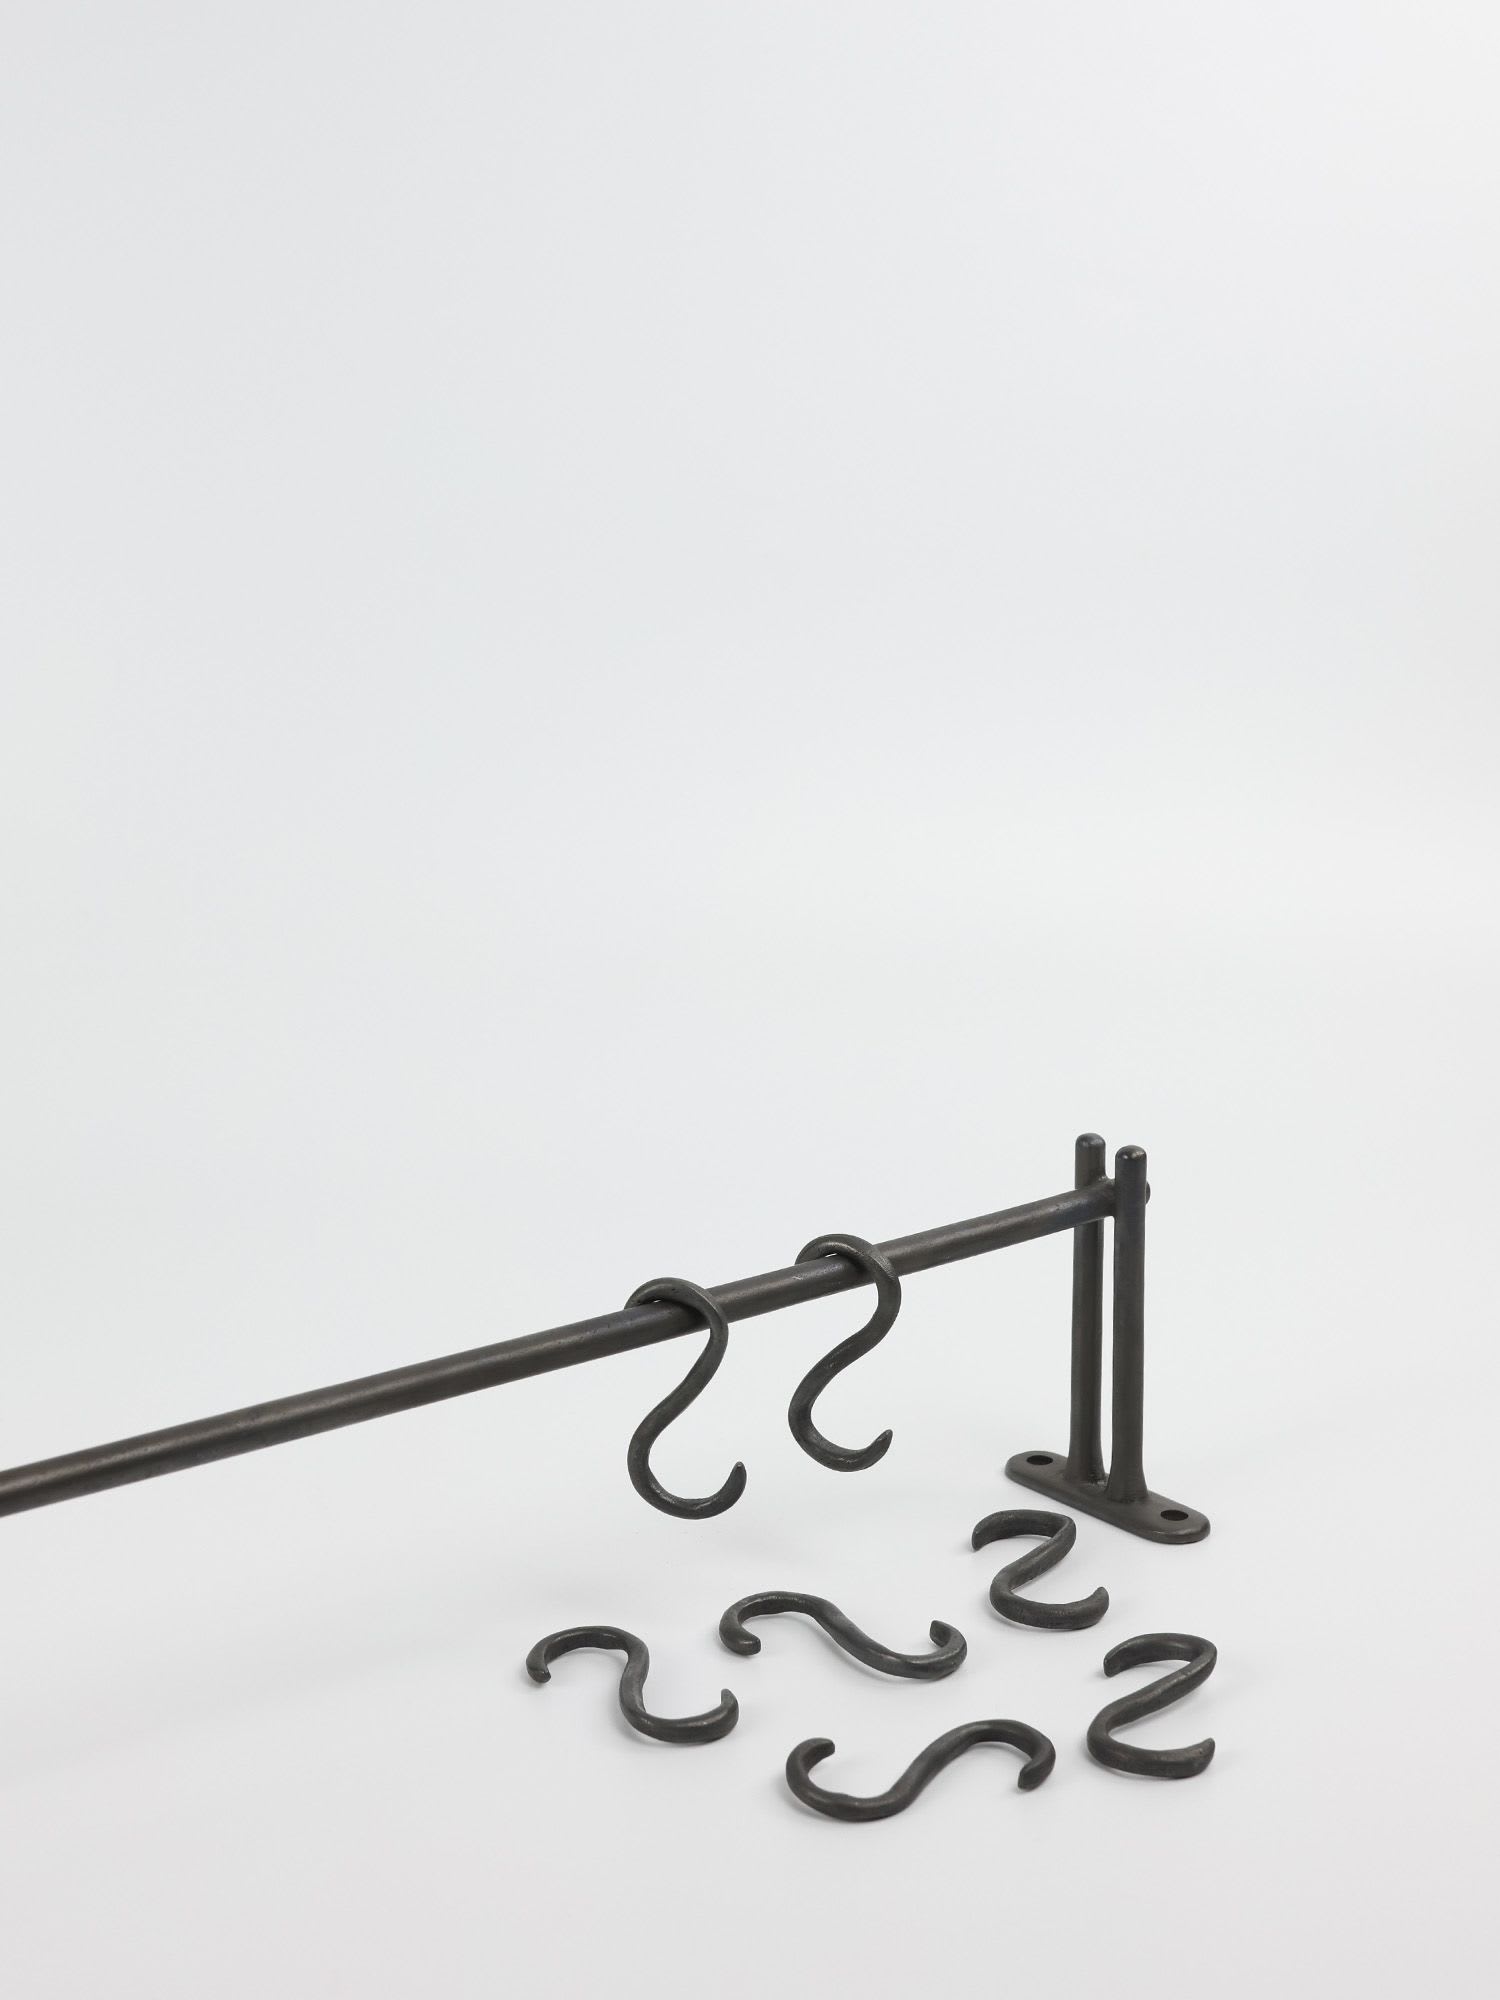 Bathroom & Kitchen Hanging Rail With 7 Hooks N01 - 24 Inches by Poignees  D'Amour French Bronze Hardware.